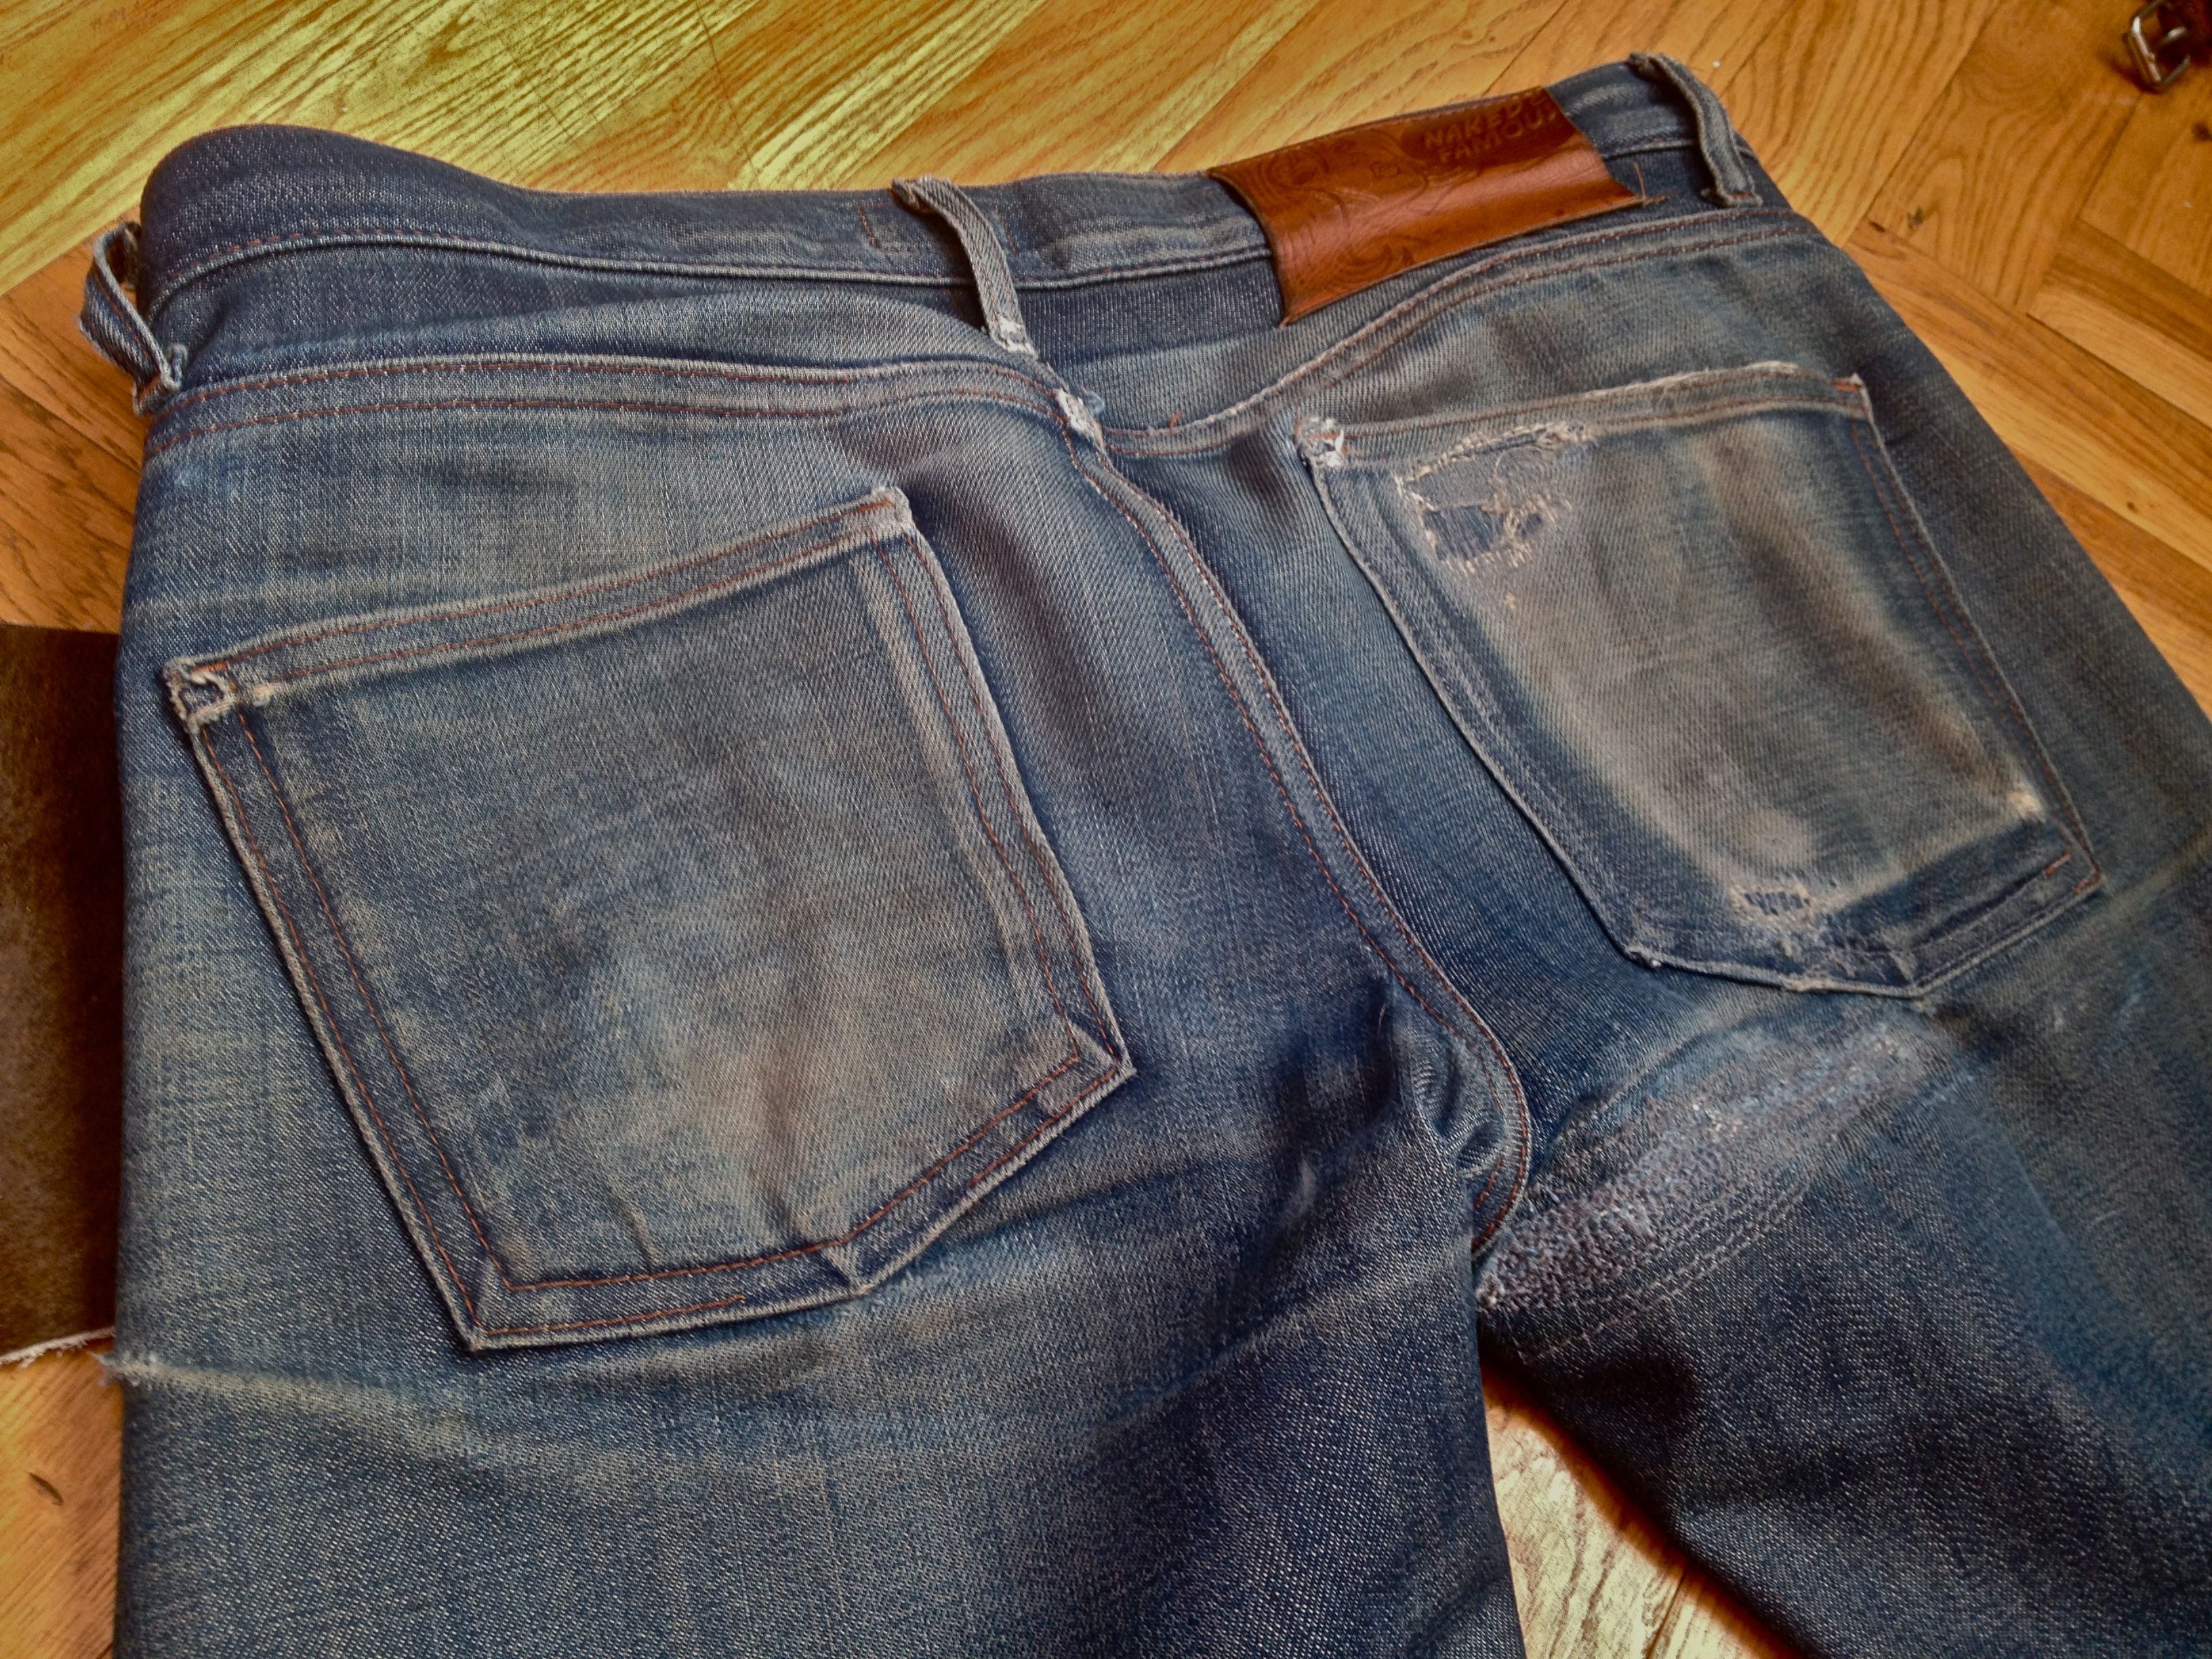 Canadian Jeans From America - Rope Dye Crafted Goods